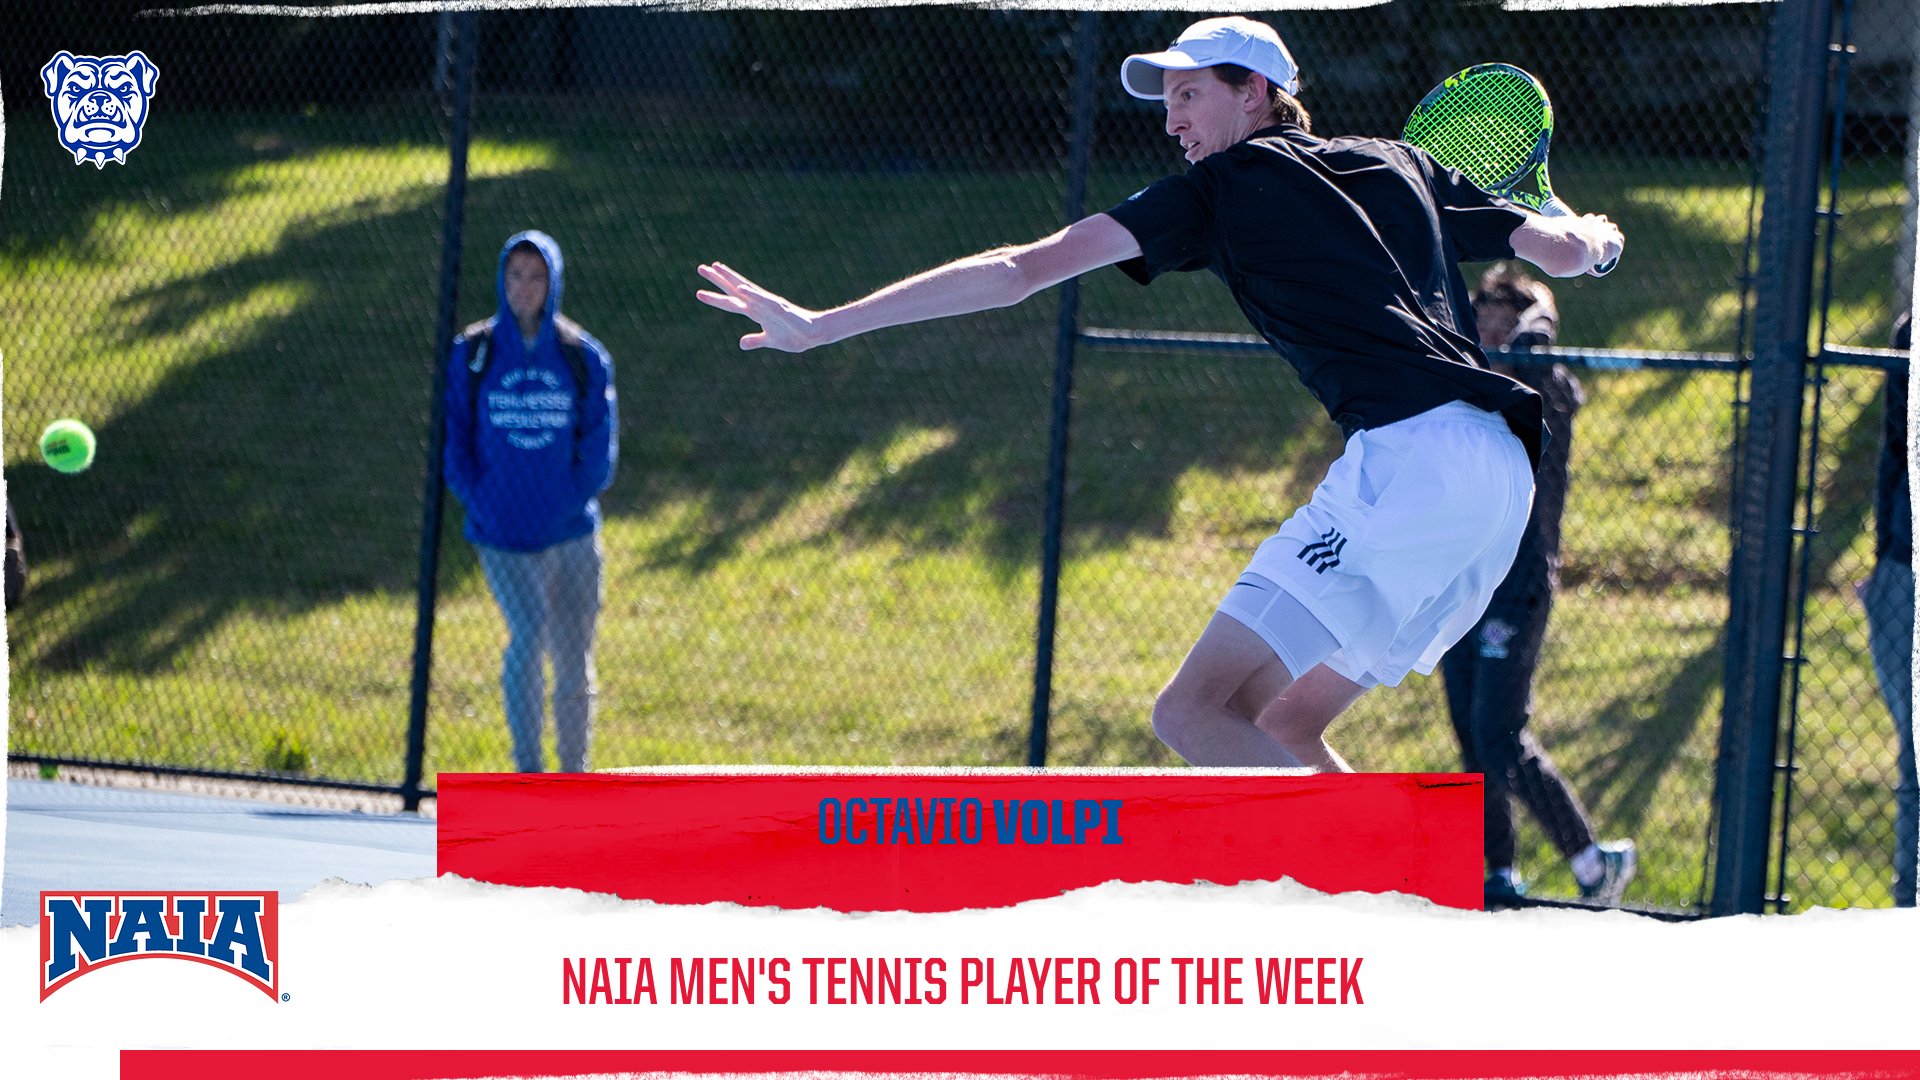 TWU's Volpi Earns NAIA Men's Tennis Player of the Week Honors